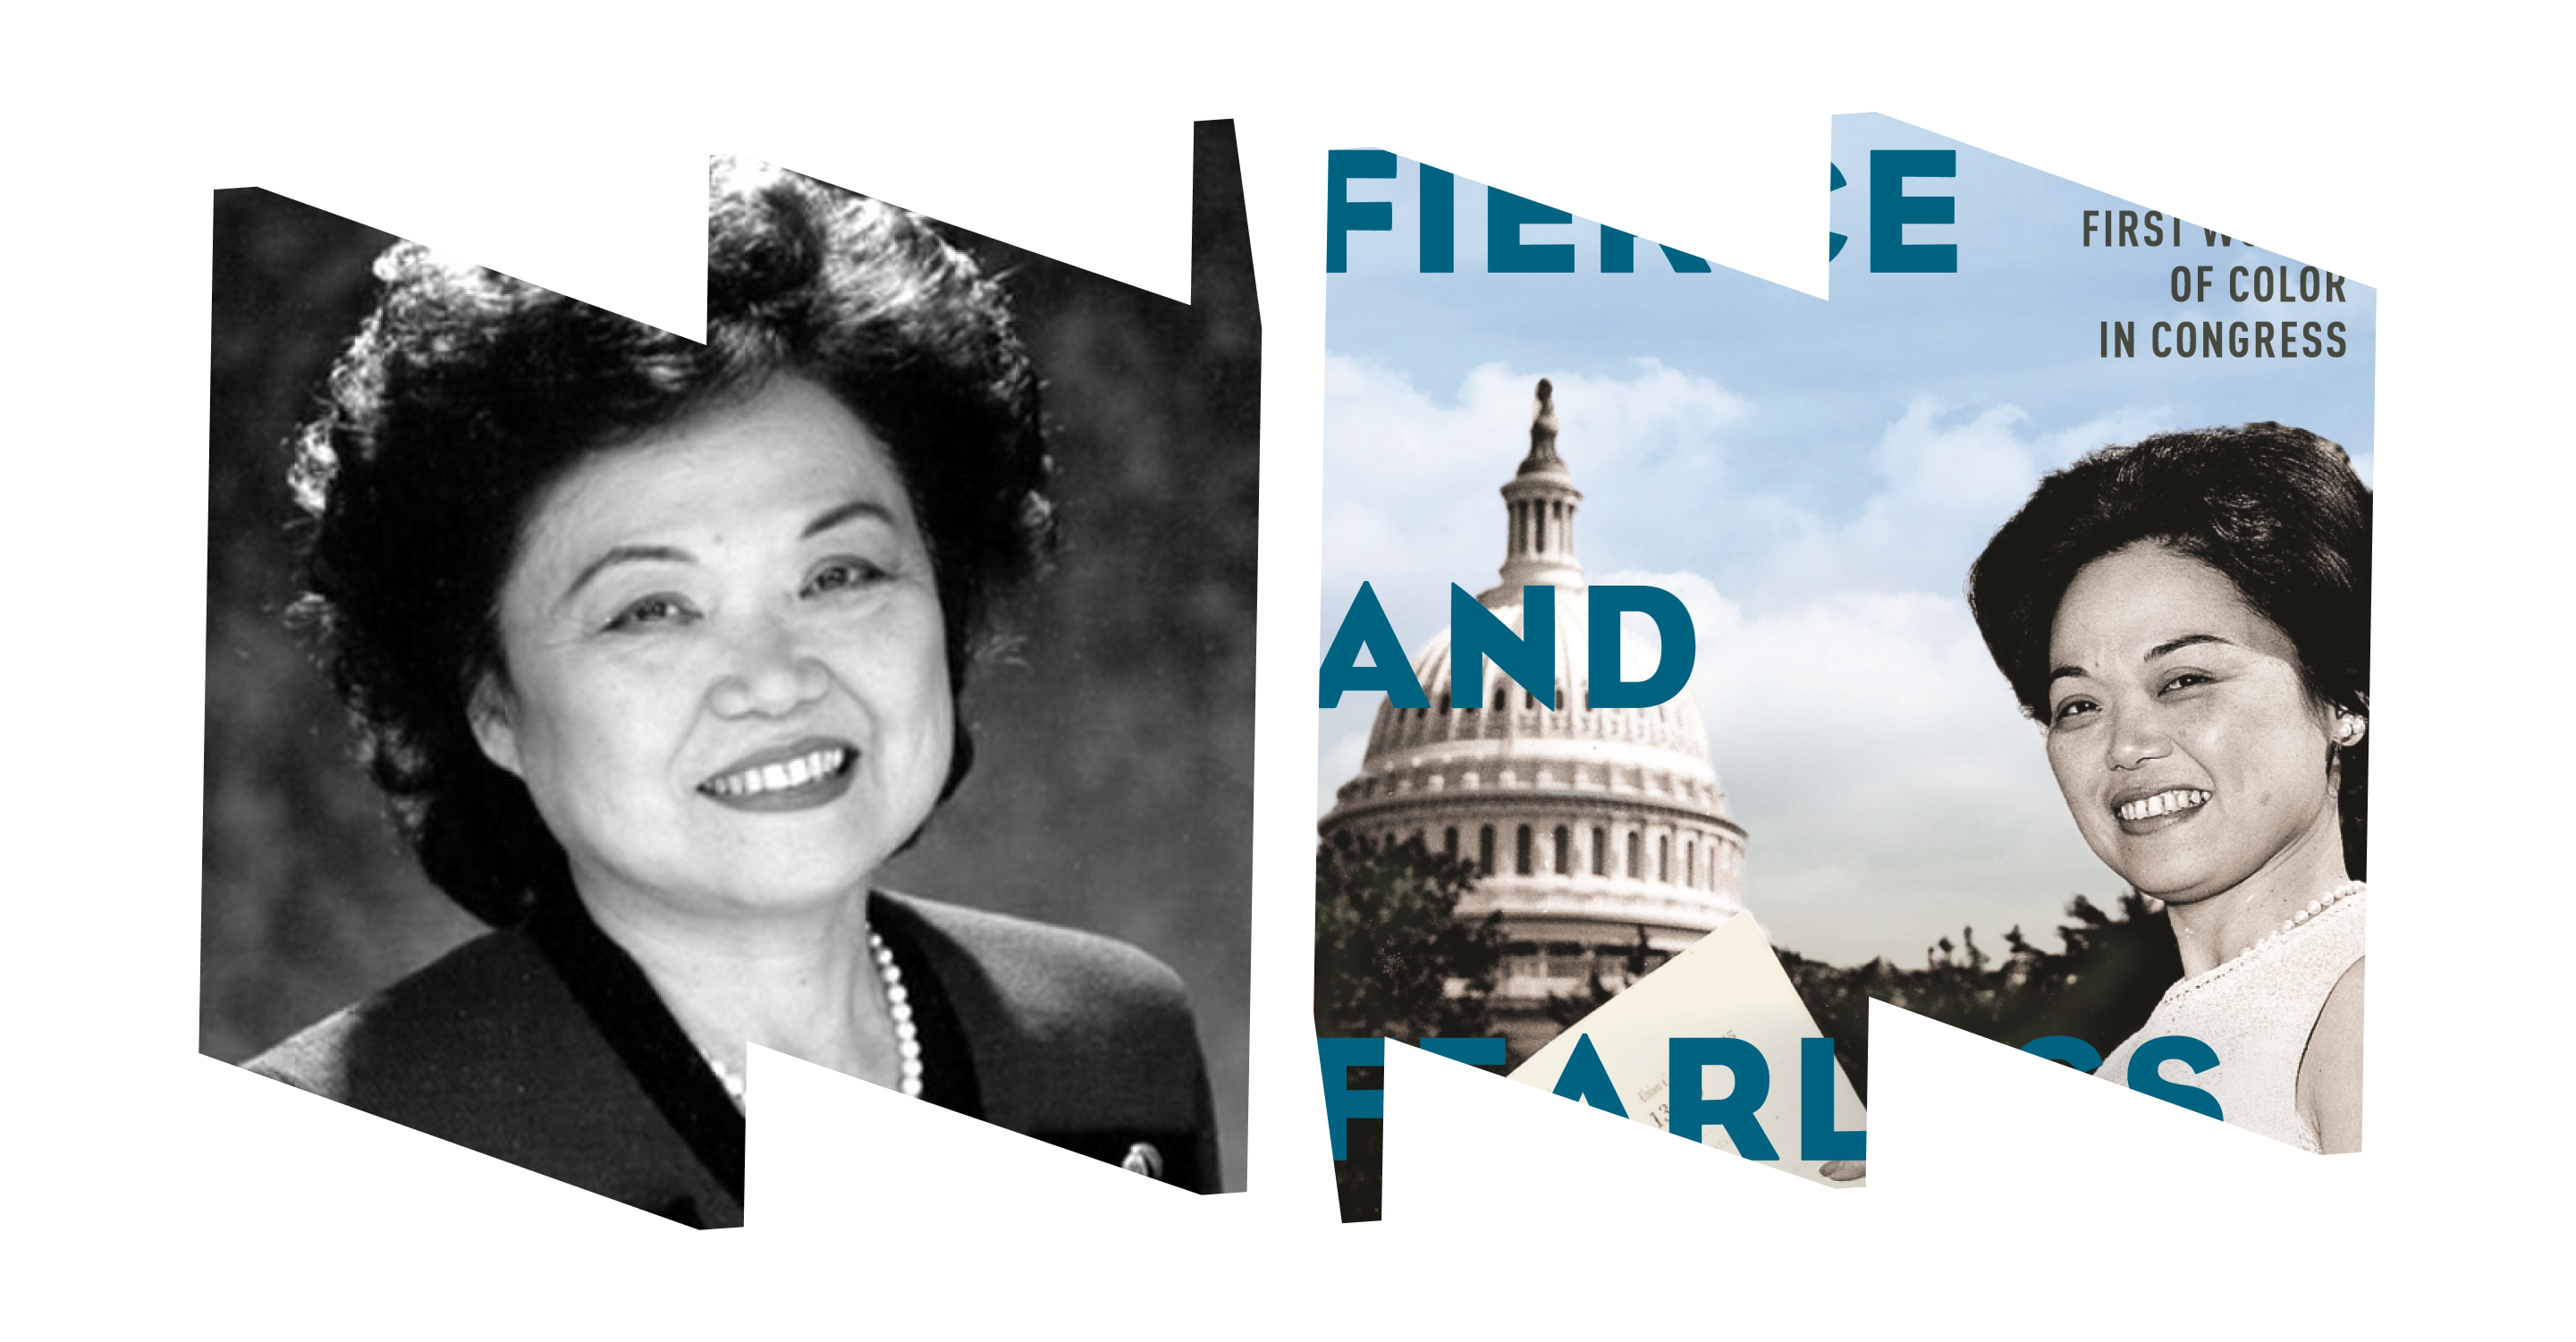 Black and white headshot of Patsy Mink in left "W" frame; cover of Fierce and Fearless, image of Patsy Mink in front of U.S. Capitol, on right in "M" frame.